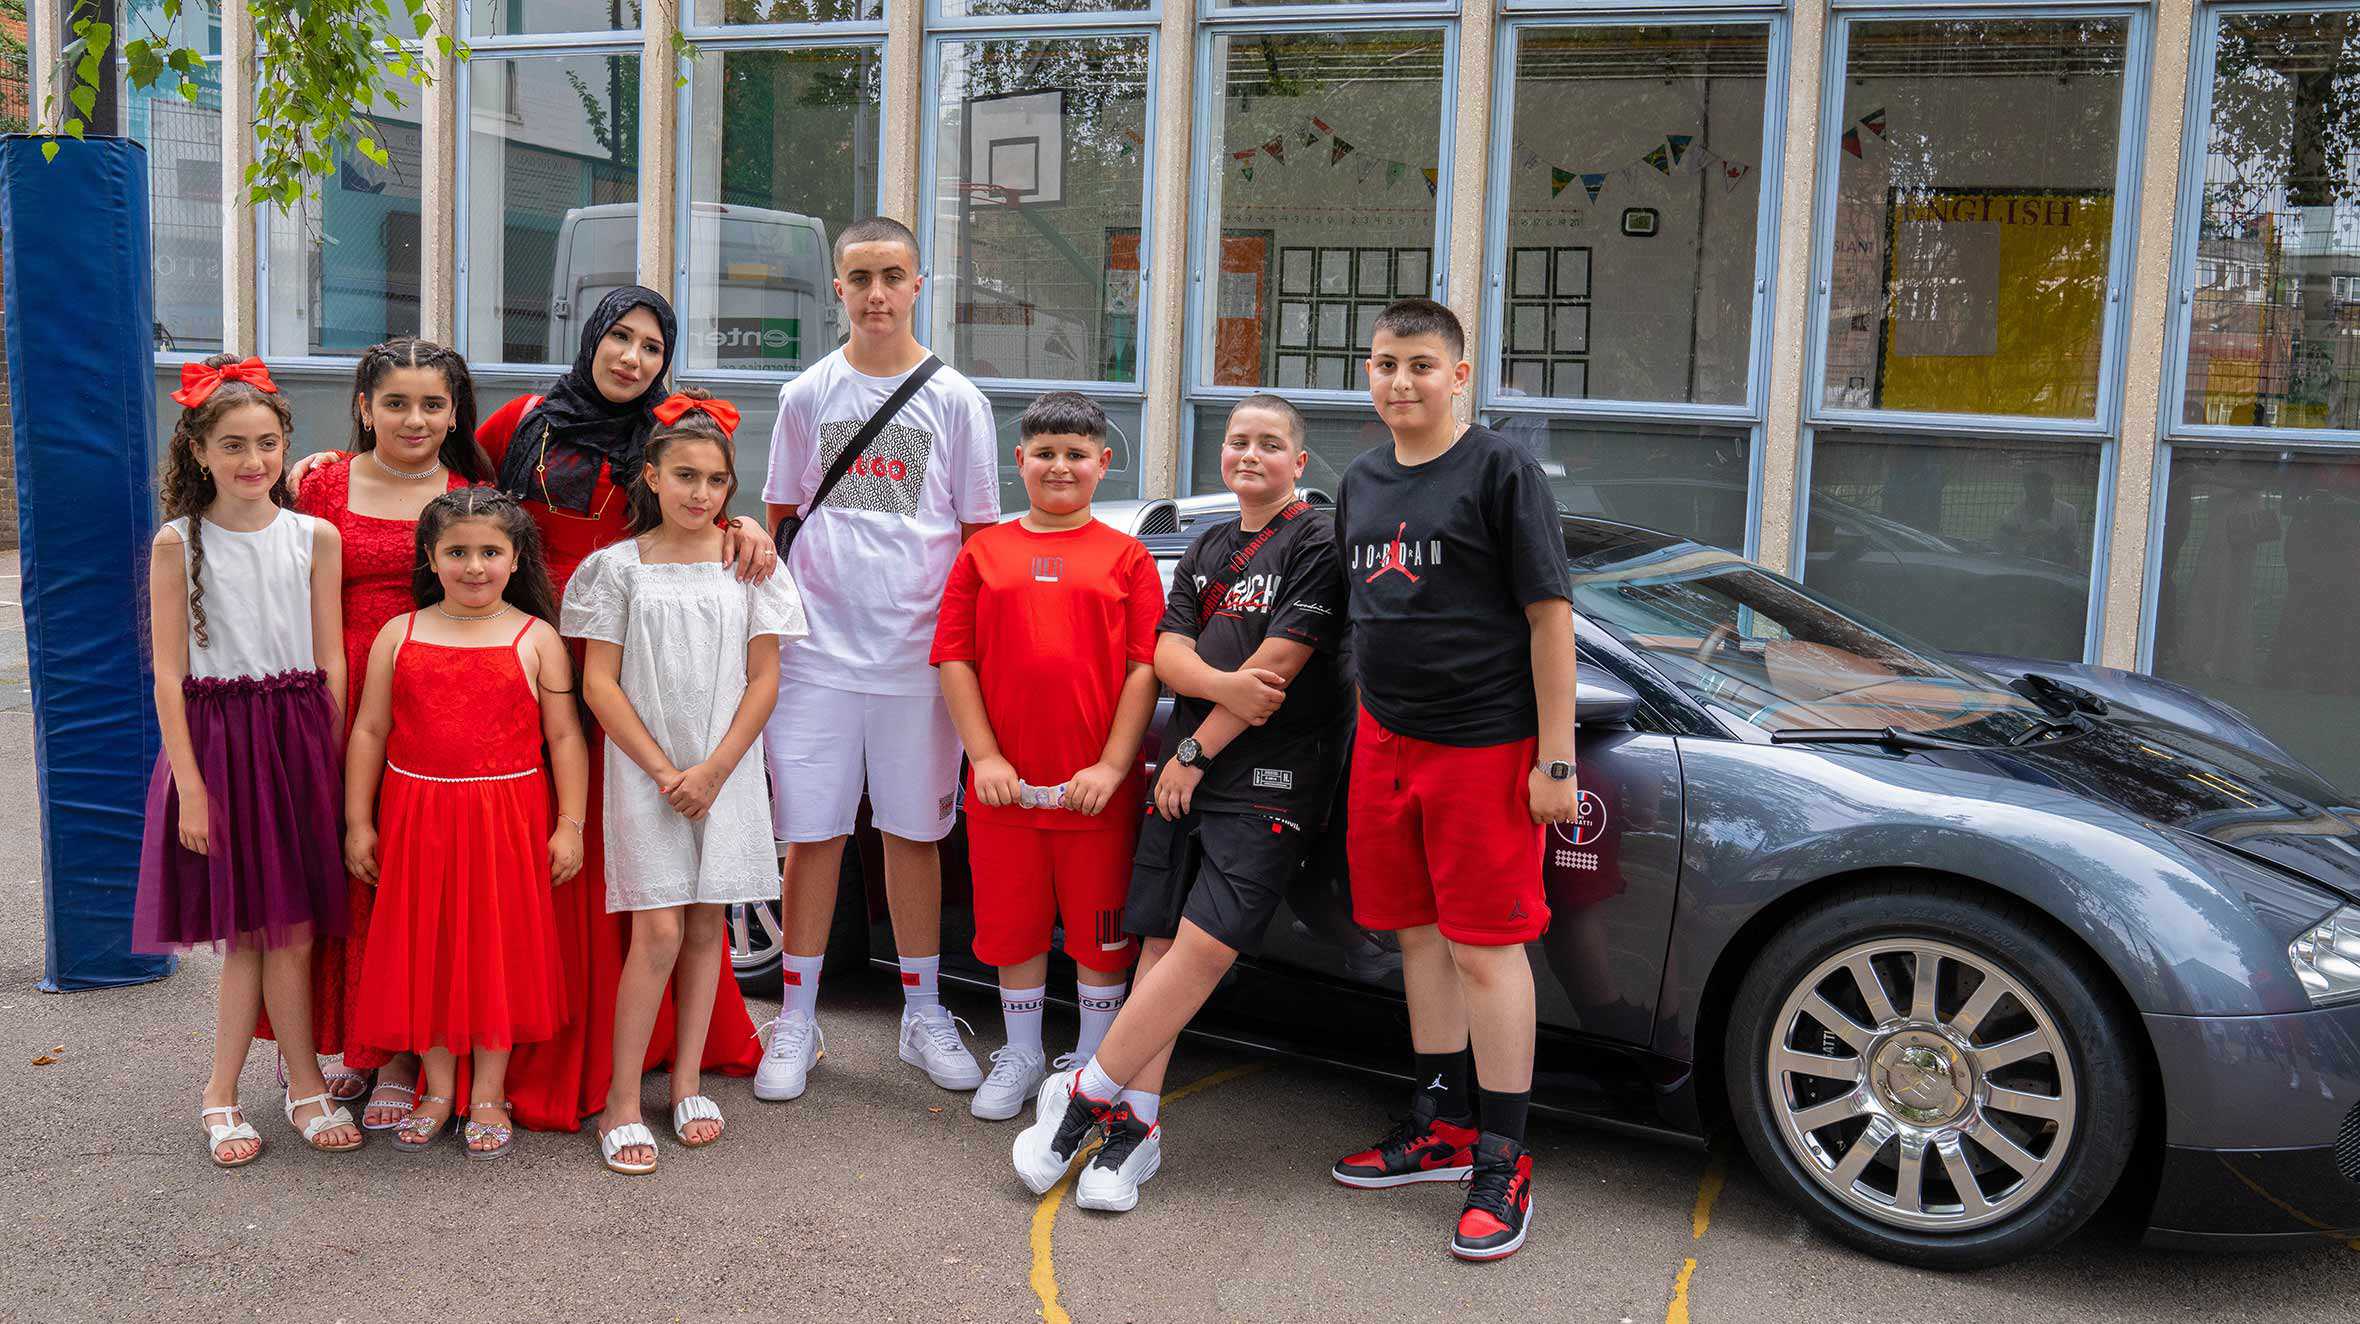 Adil, standing with his family and friends in front of a Bugatti Veyron supercar.